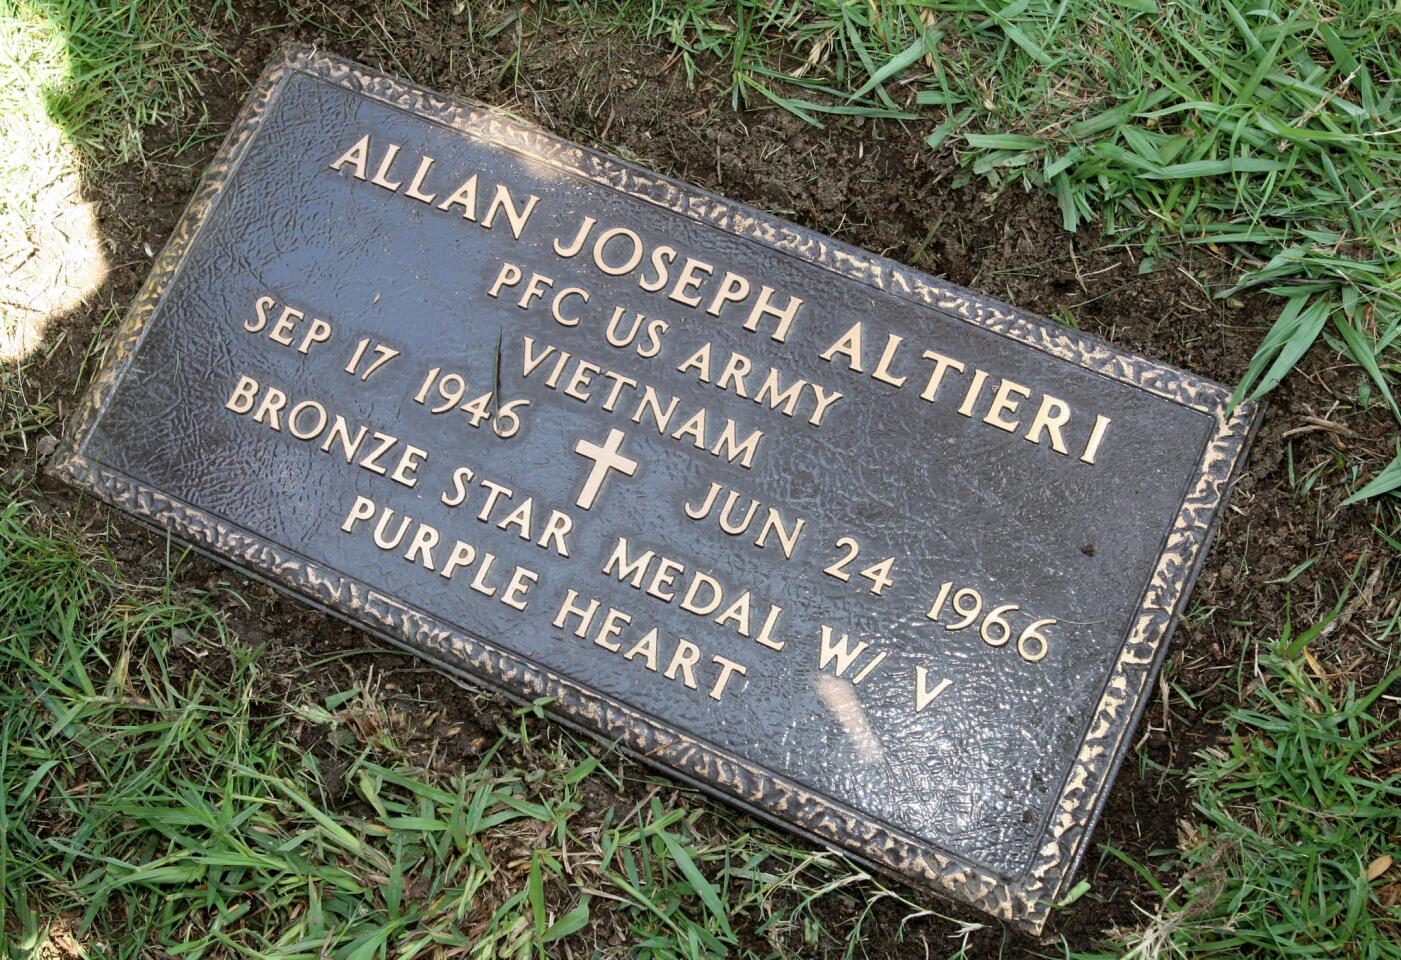 A plaque has been installed at the unmarked grave site for Glendale resident and US Army PFC Allan J. Altieri 50 years to the day after he was killed in Vietnam, at San Fernando Mission Cemetery in Mission Hills on Friday, June 24, 2016. PFC Altieri, a graduate of Glendale High School, died at age 19 during a battle in Vietnam. His family moved to the East Coast after Altieri died because, according to a friend, his parents couldn't take the loss.